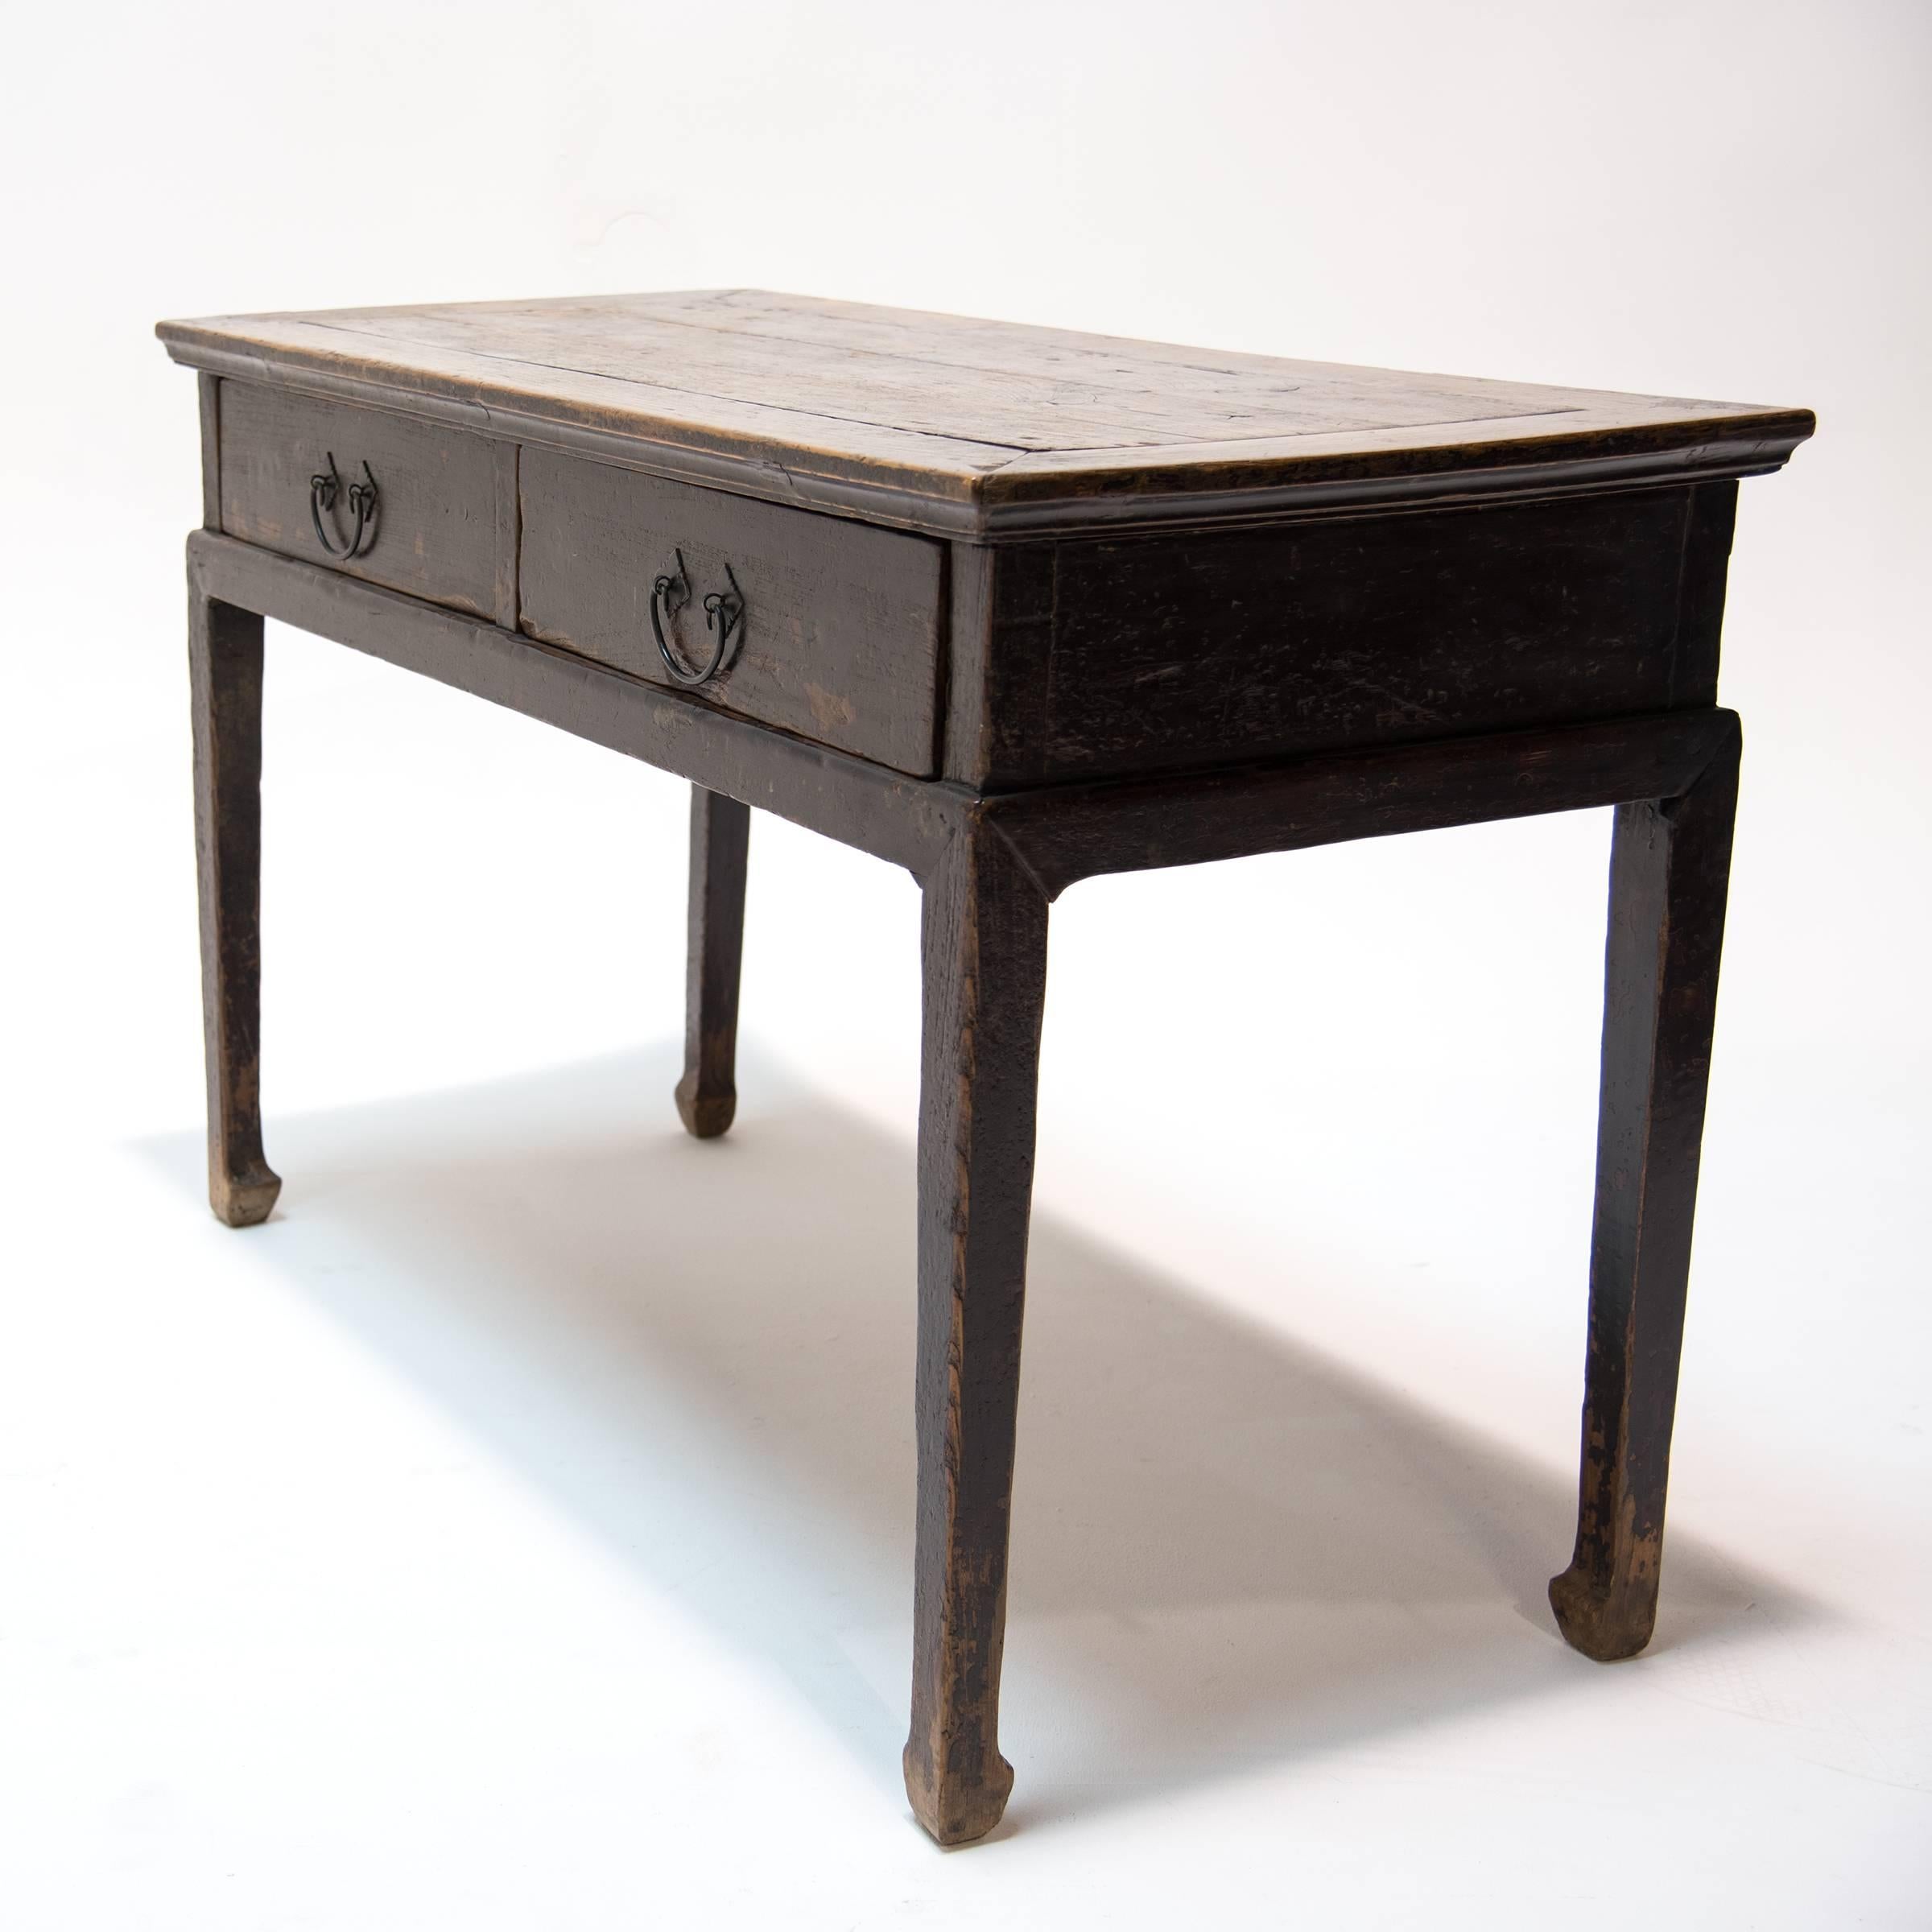 This finely crafted table from China’s Shanxi province was carved over two hundred years ago. The excellent proportions, concealed joinery, original hand forged hardware, and hoofed legs all have an austere beauty that belie the excellent